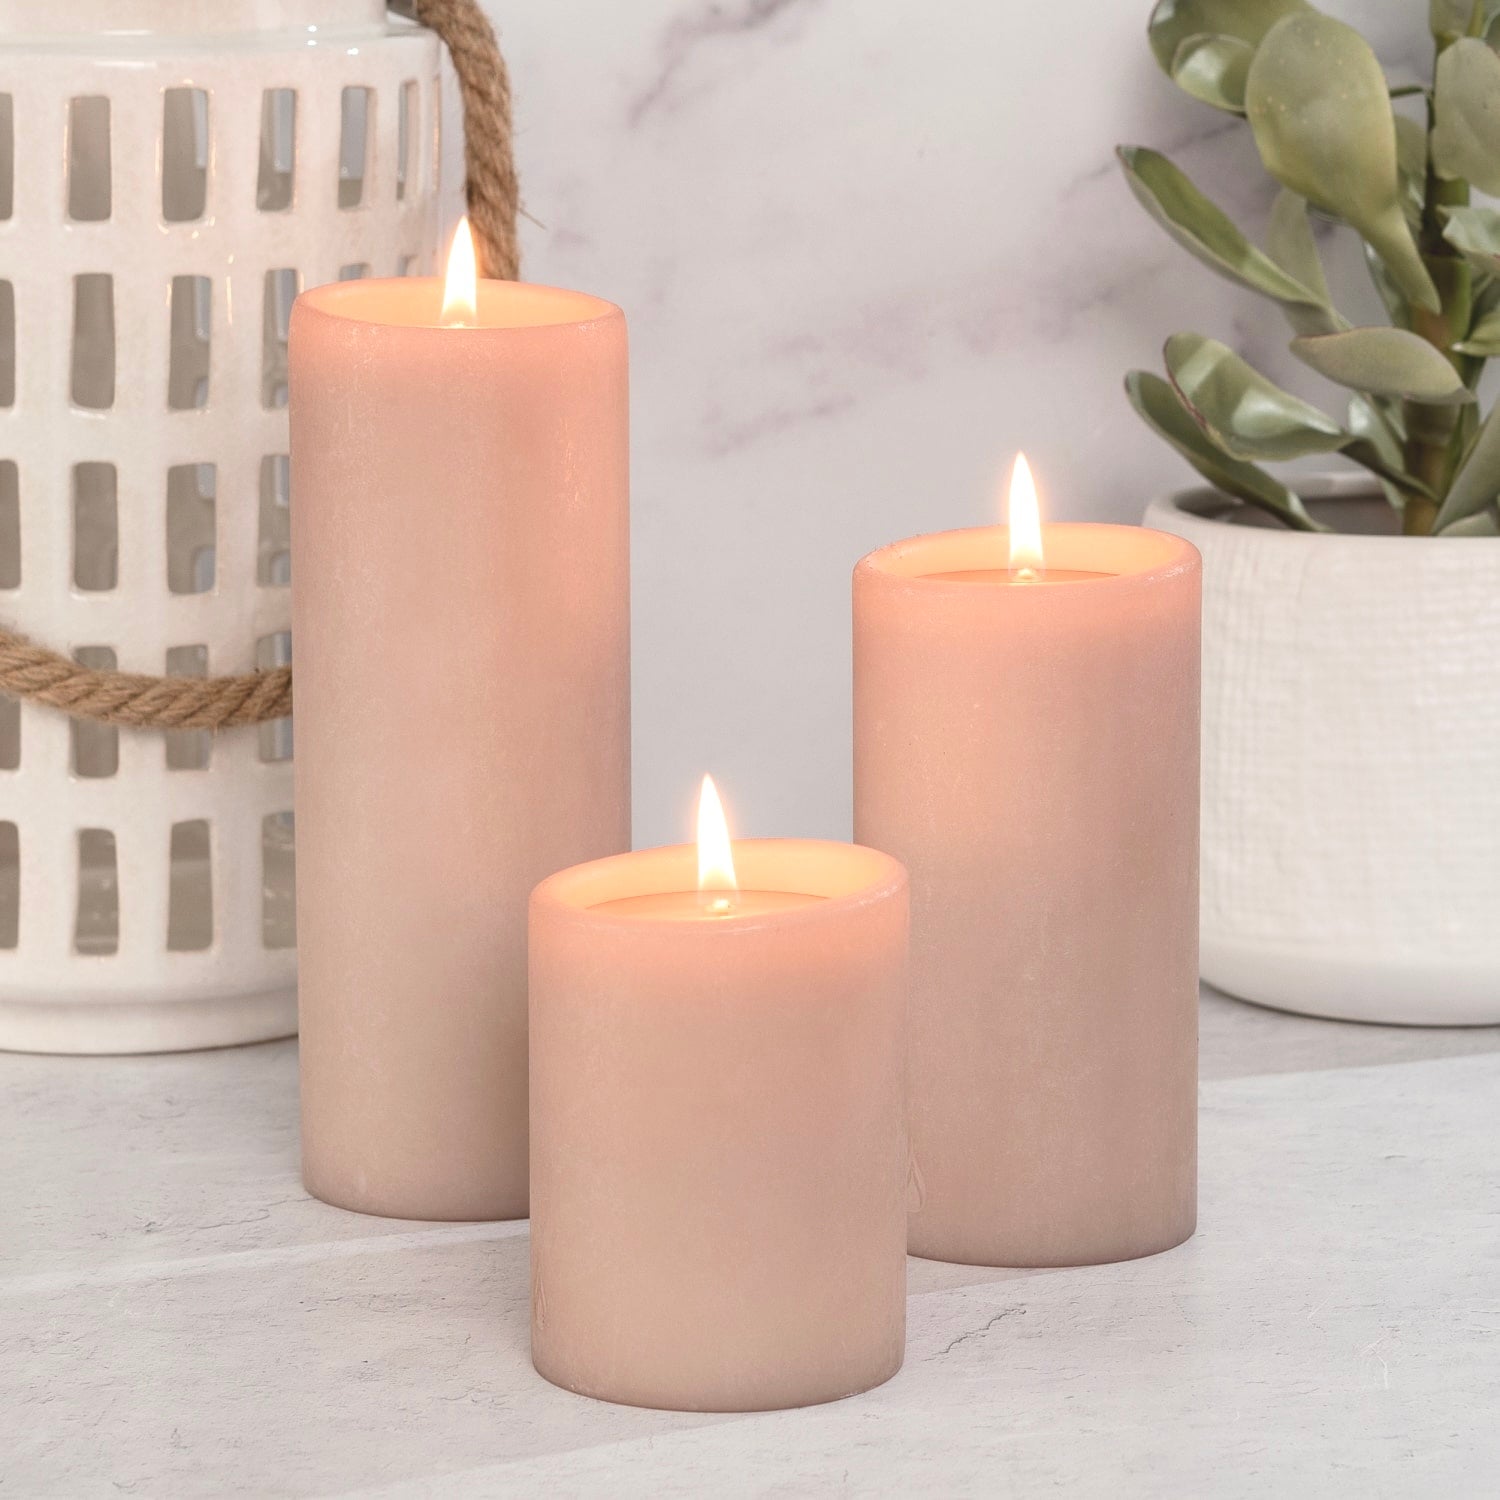 French Vanilla candle refill